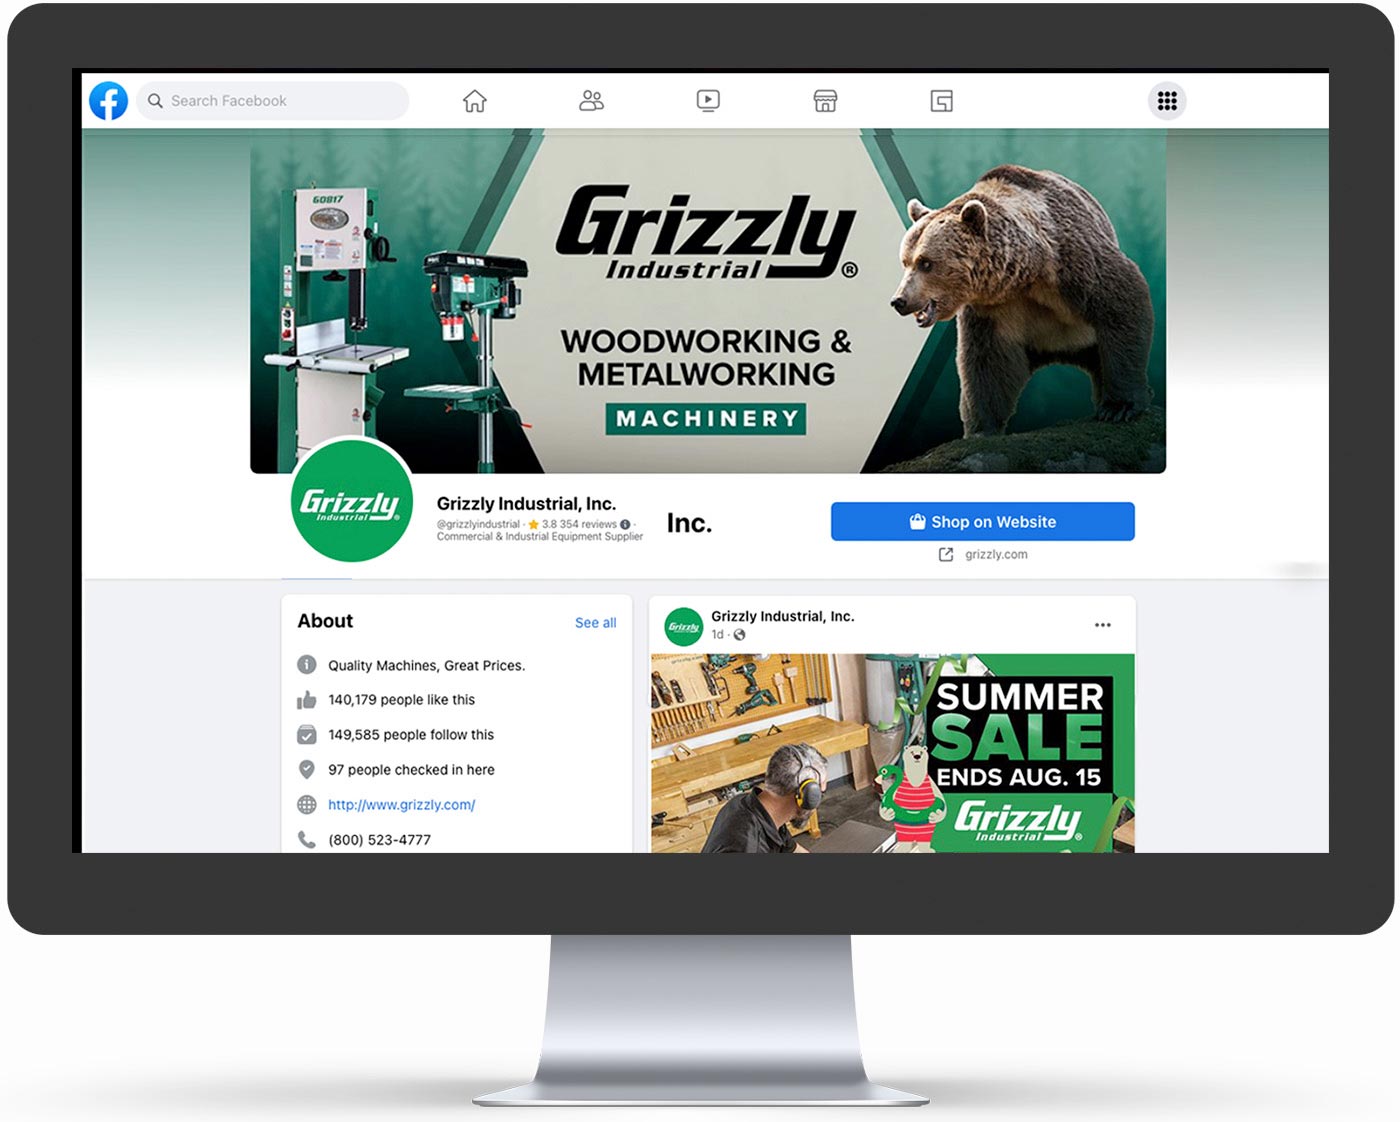 An image of the Grizzly Industrial Facebook social media page